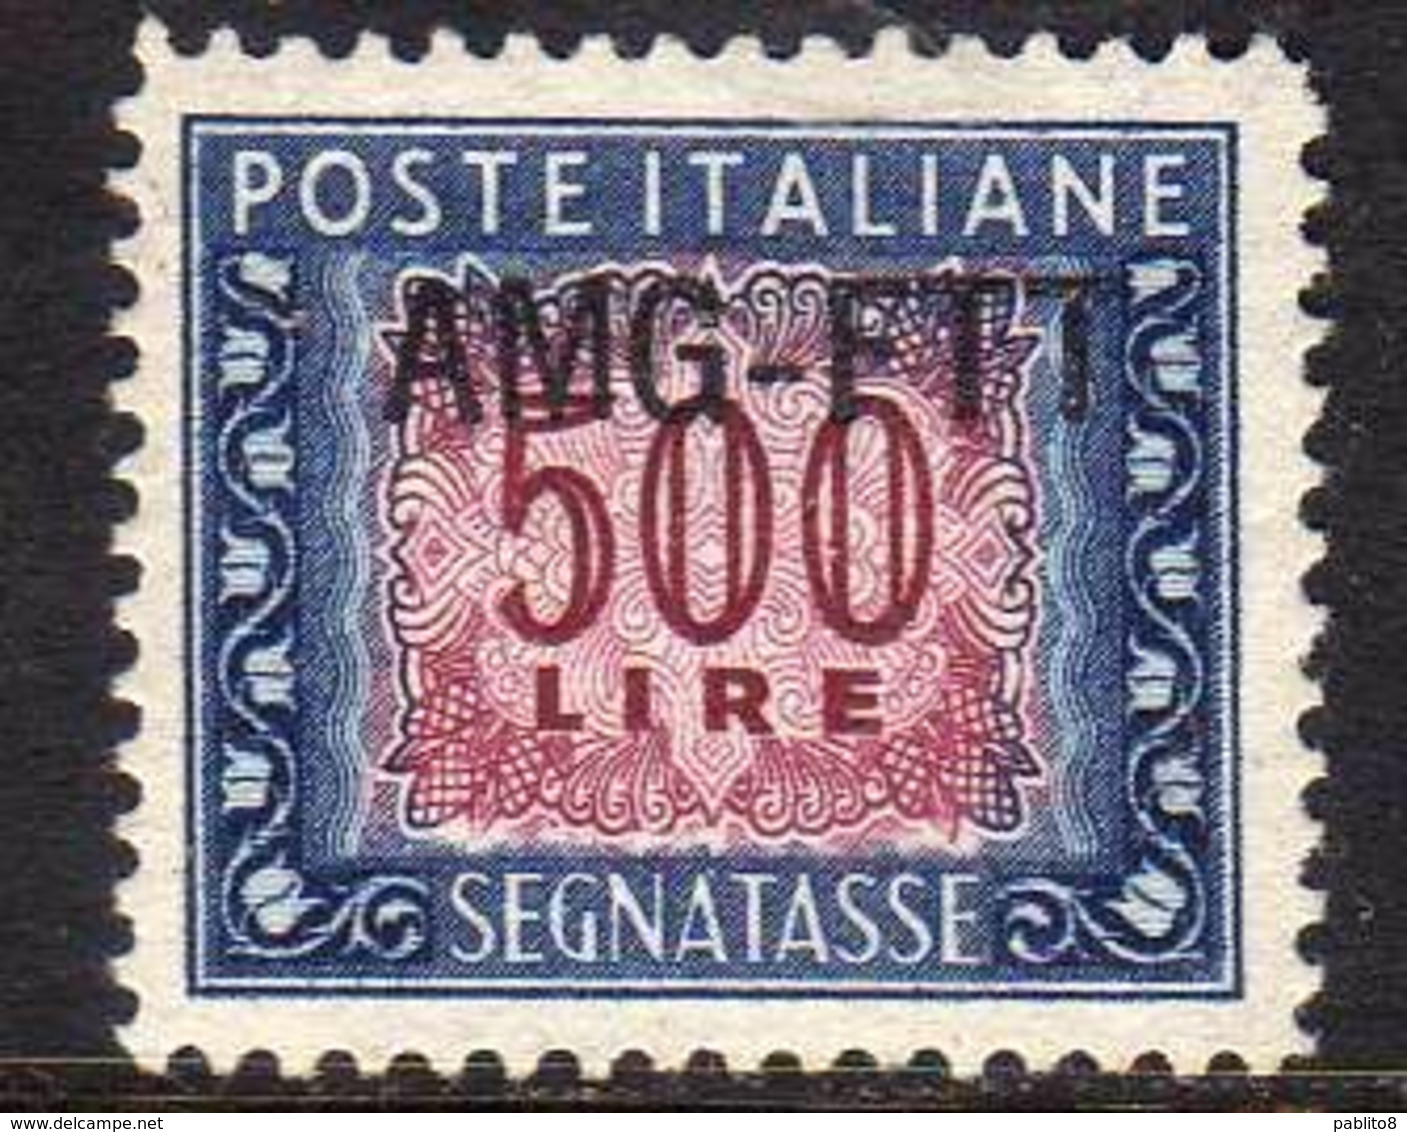 TRIESTE A 1947 - 1954 AMG-FTT OVERPRINTED SEGNATASSE POSTAGE DUE TASSE TAXE LIRE 500 MNH BEN CENTRATO - Postage Due